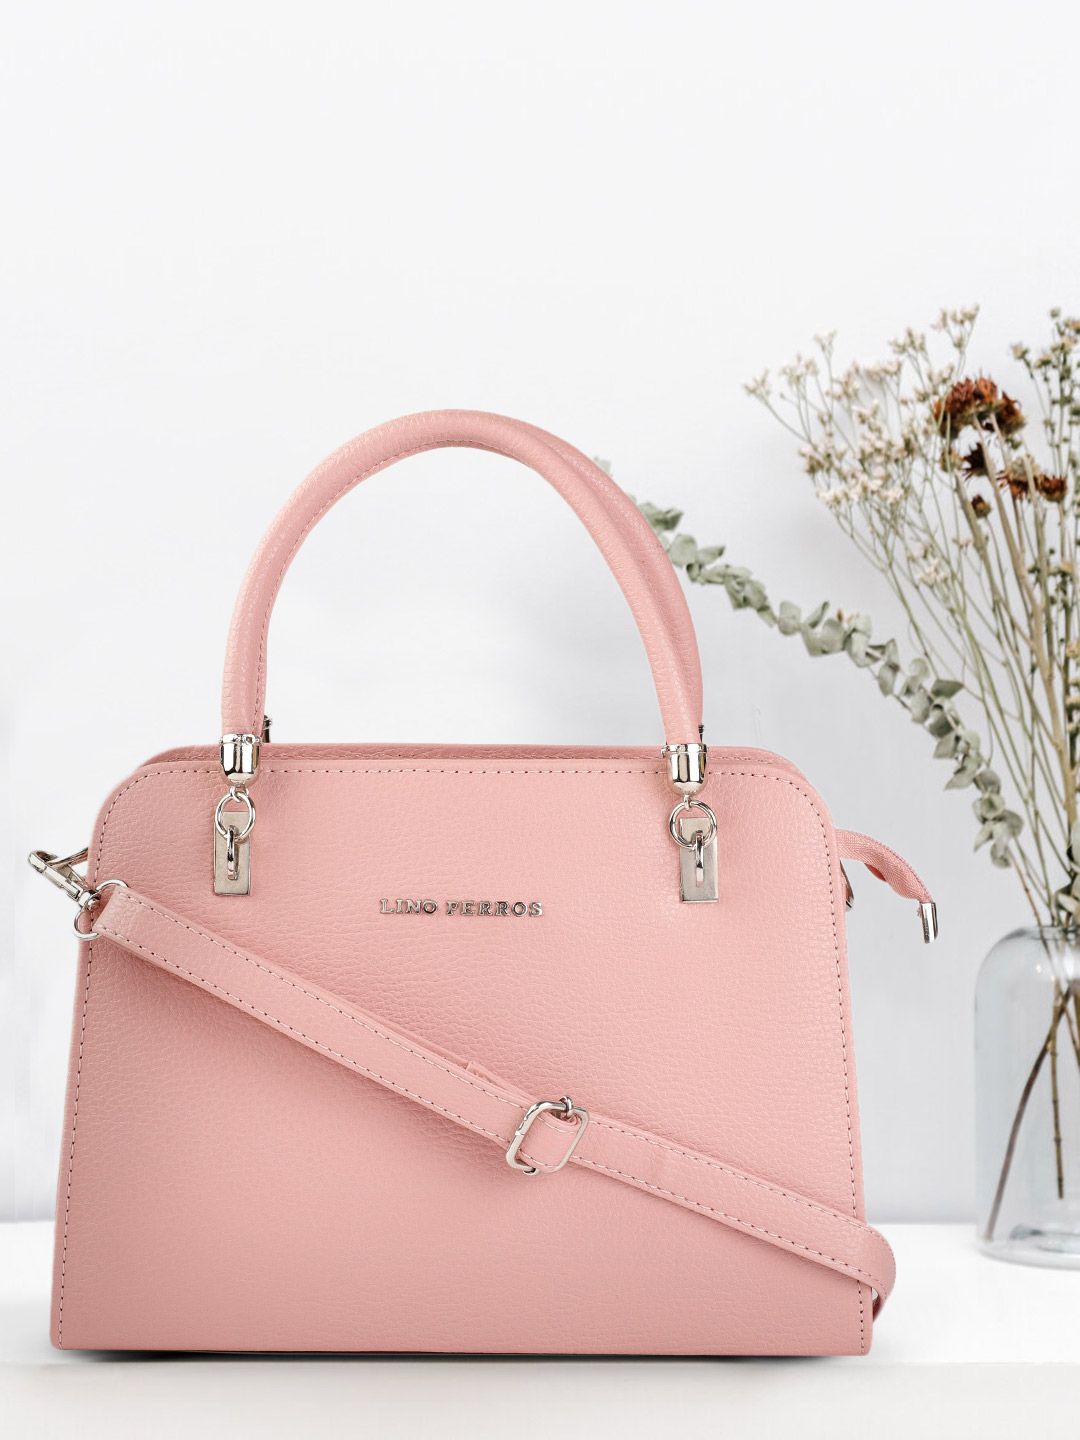 Lino Perros Peach-Coloured Solid Structured Handheld Bag Price in India